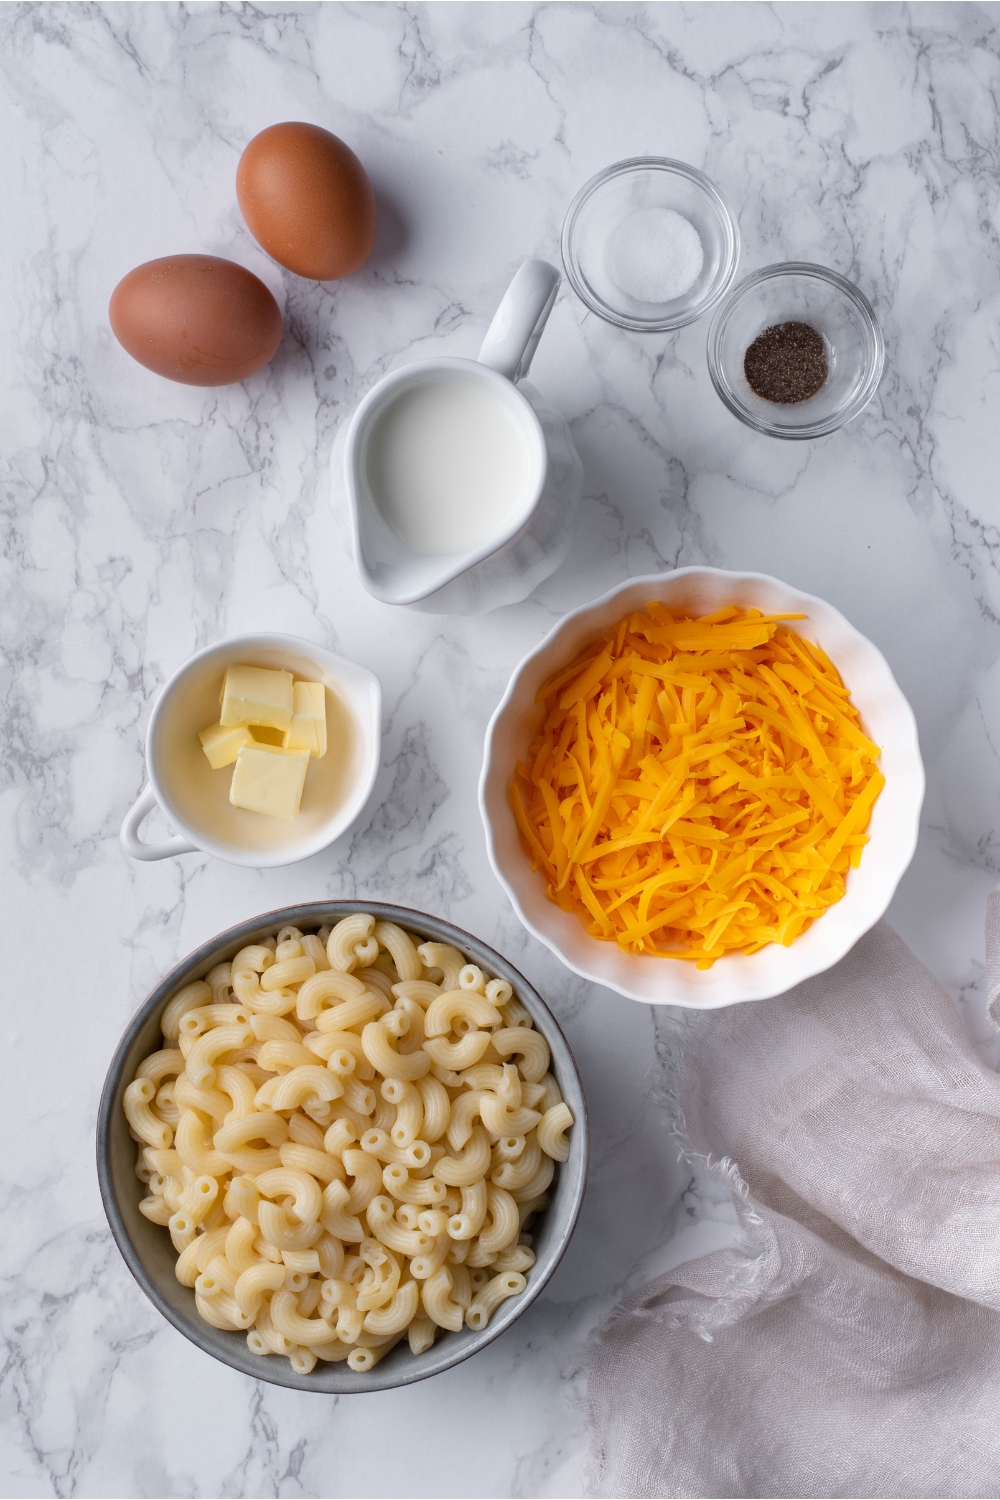 An assortment of ingredients including bowls of shredded cheese, elbow macaroni, butter cubes, salt, pepper, a container of milk and two eggs.